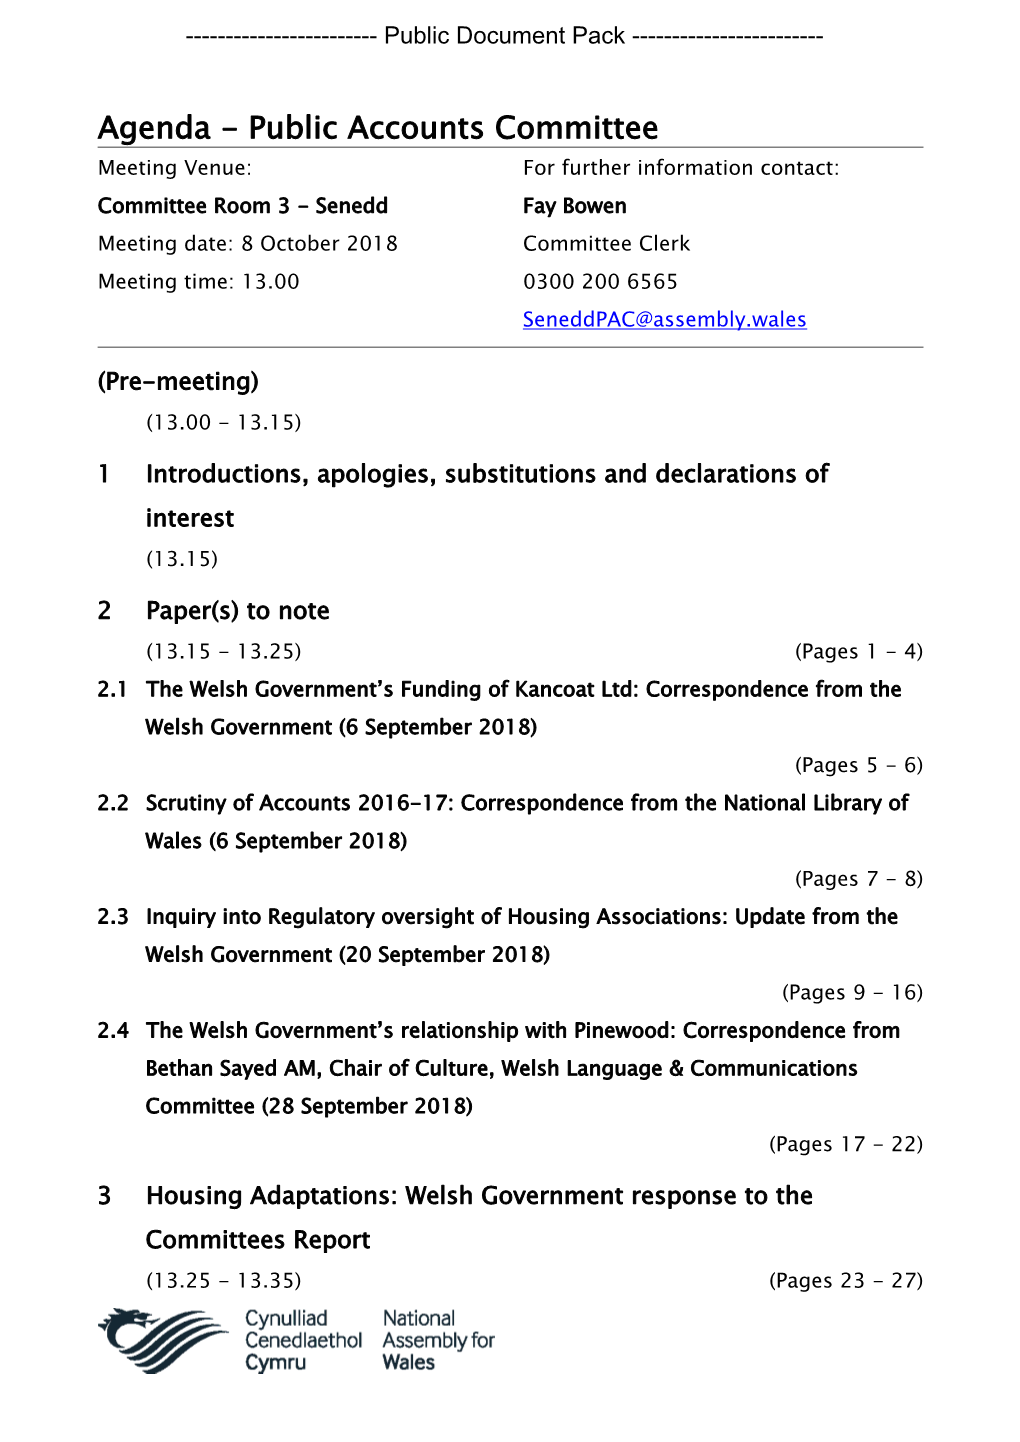 (Public Pack)Agenda Document for Public Accounts Committee, 08/10/2018 13:00